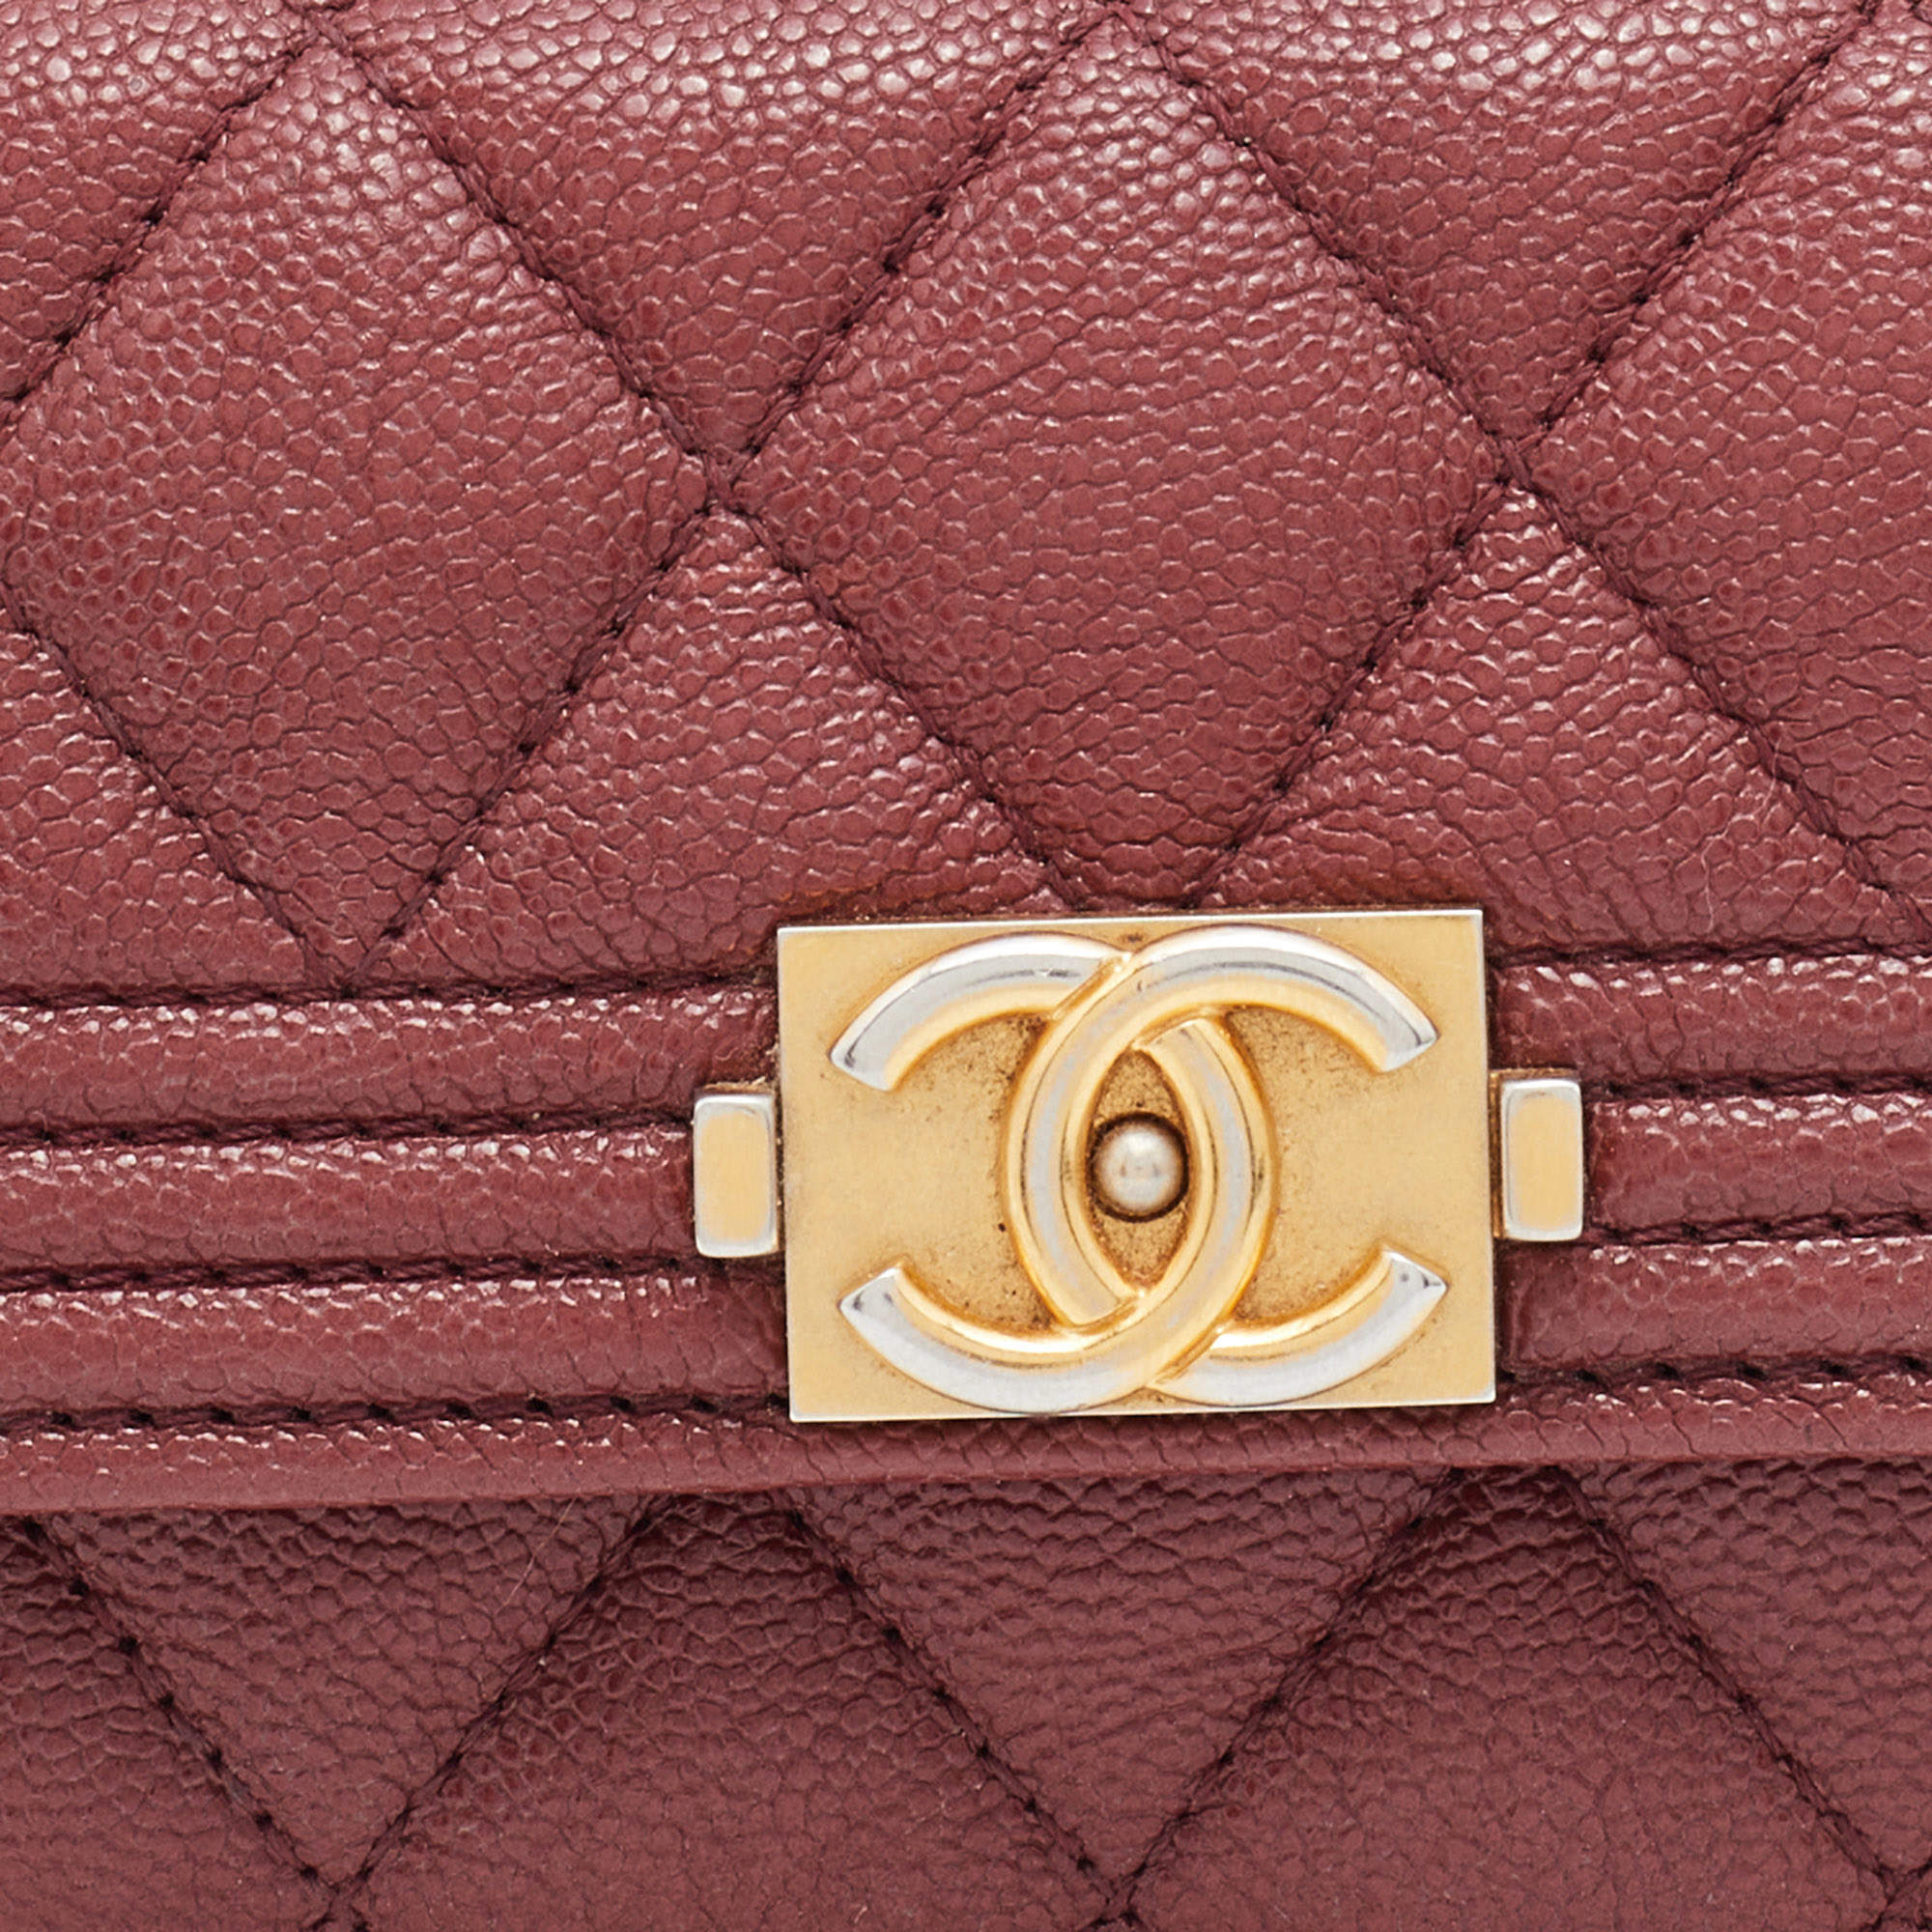 Chanel Maroon Quilted Caviar Leather Classic Zip Flap Card Holder Chanel |  The Luxury Closet